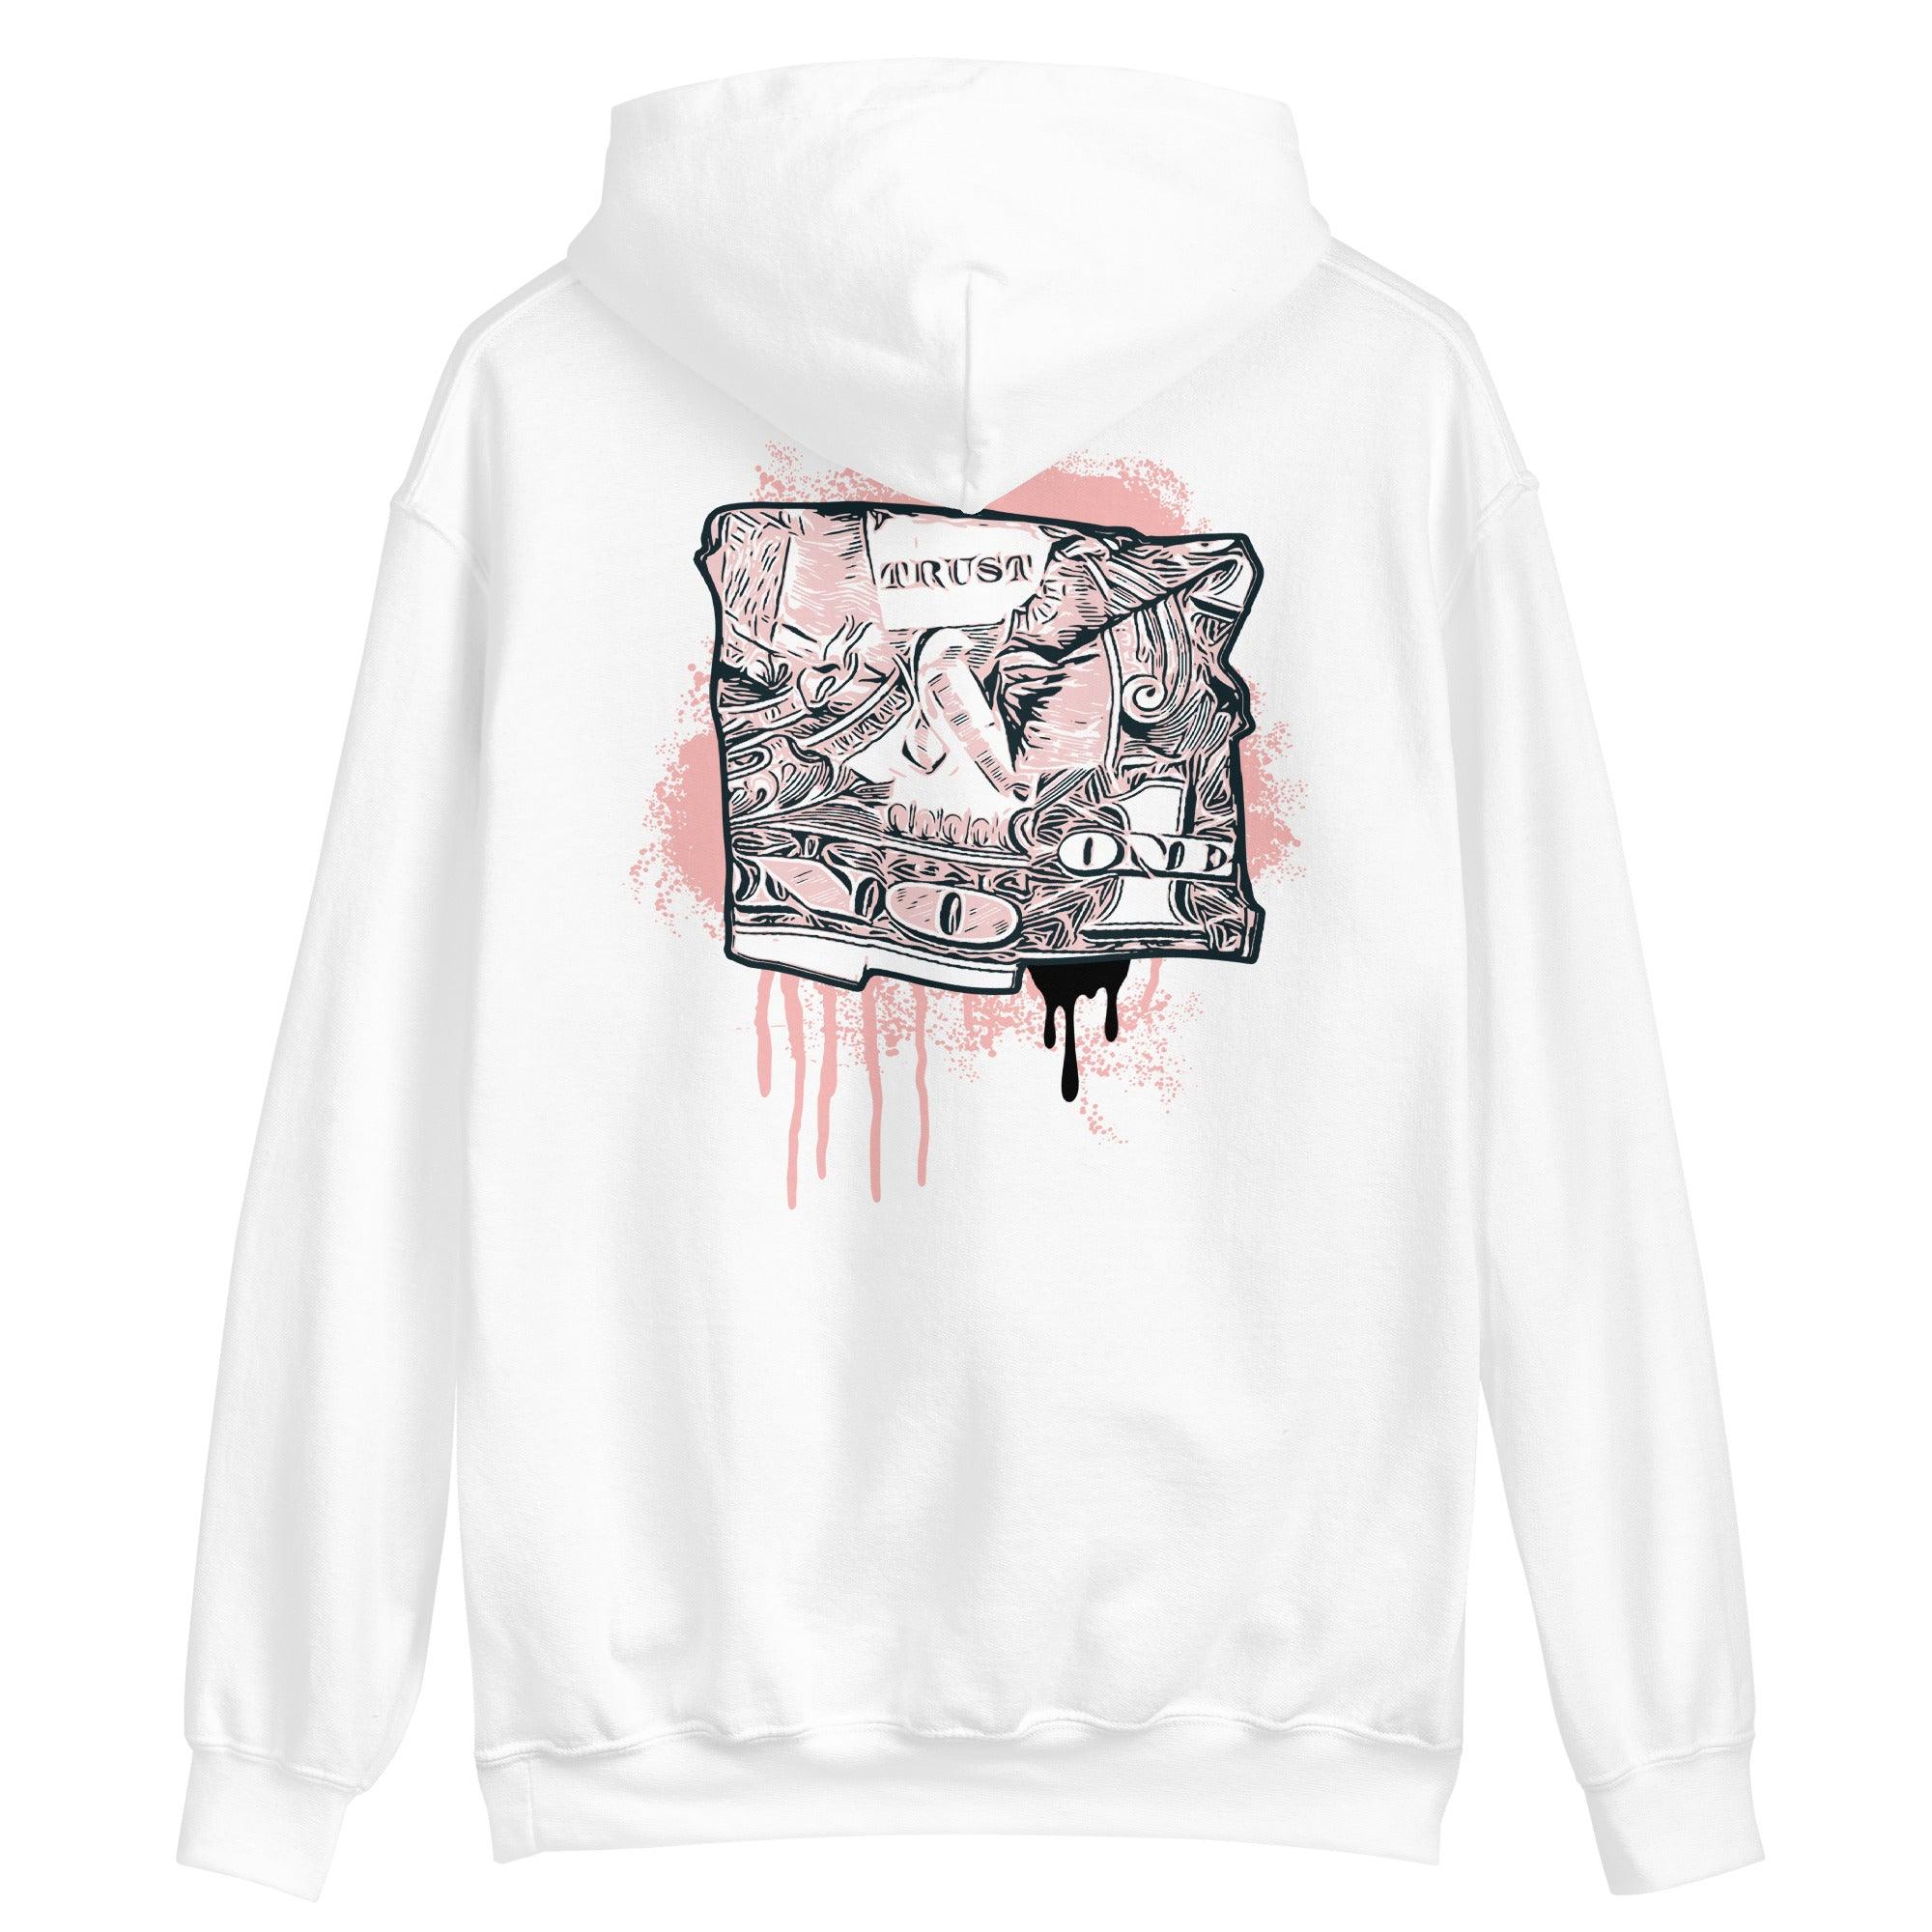 White Trust No One Dollar Hoodie Jordan 1s Bleached Coral photo